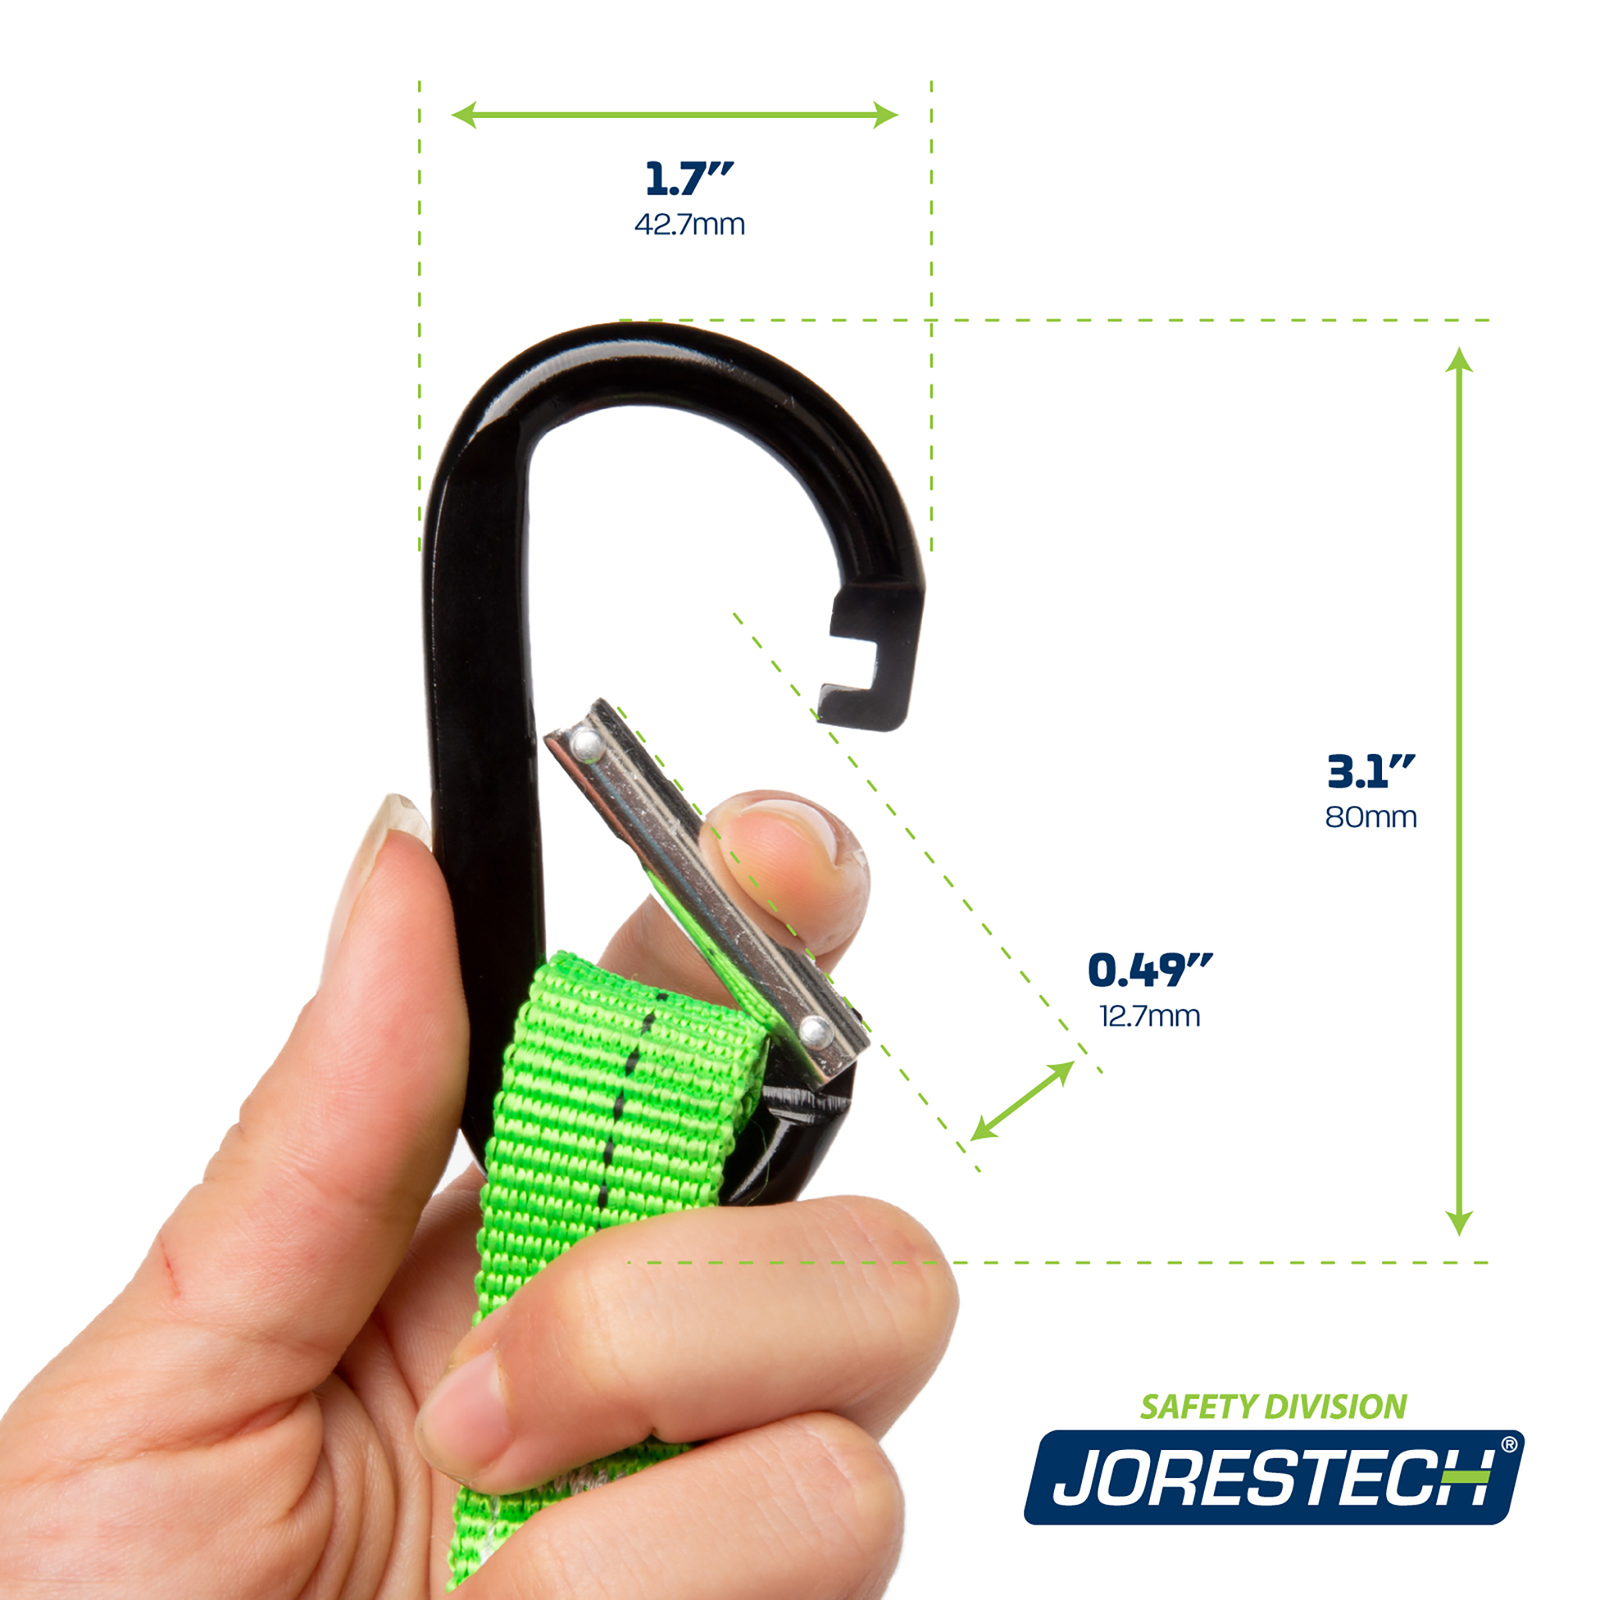 The carabiner with the self lock mechanism pulled open by a hand. Image shows measurements of the black carabiner: 1.7